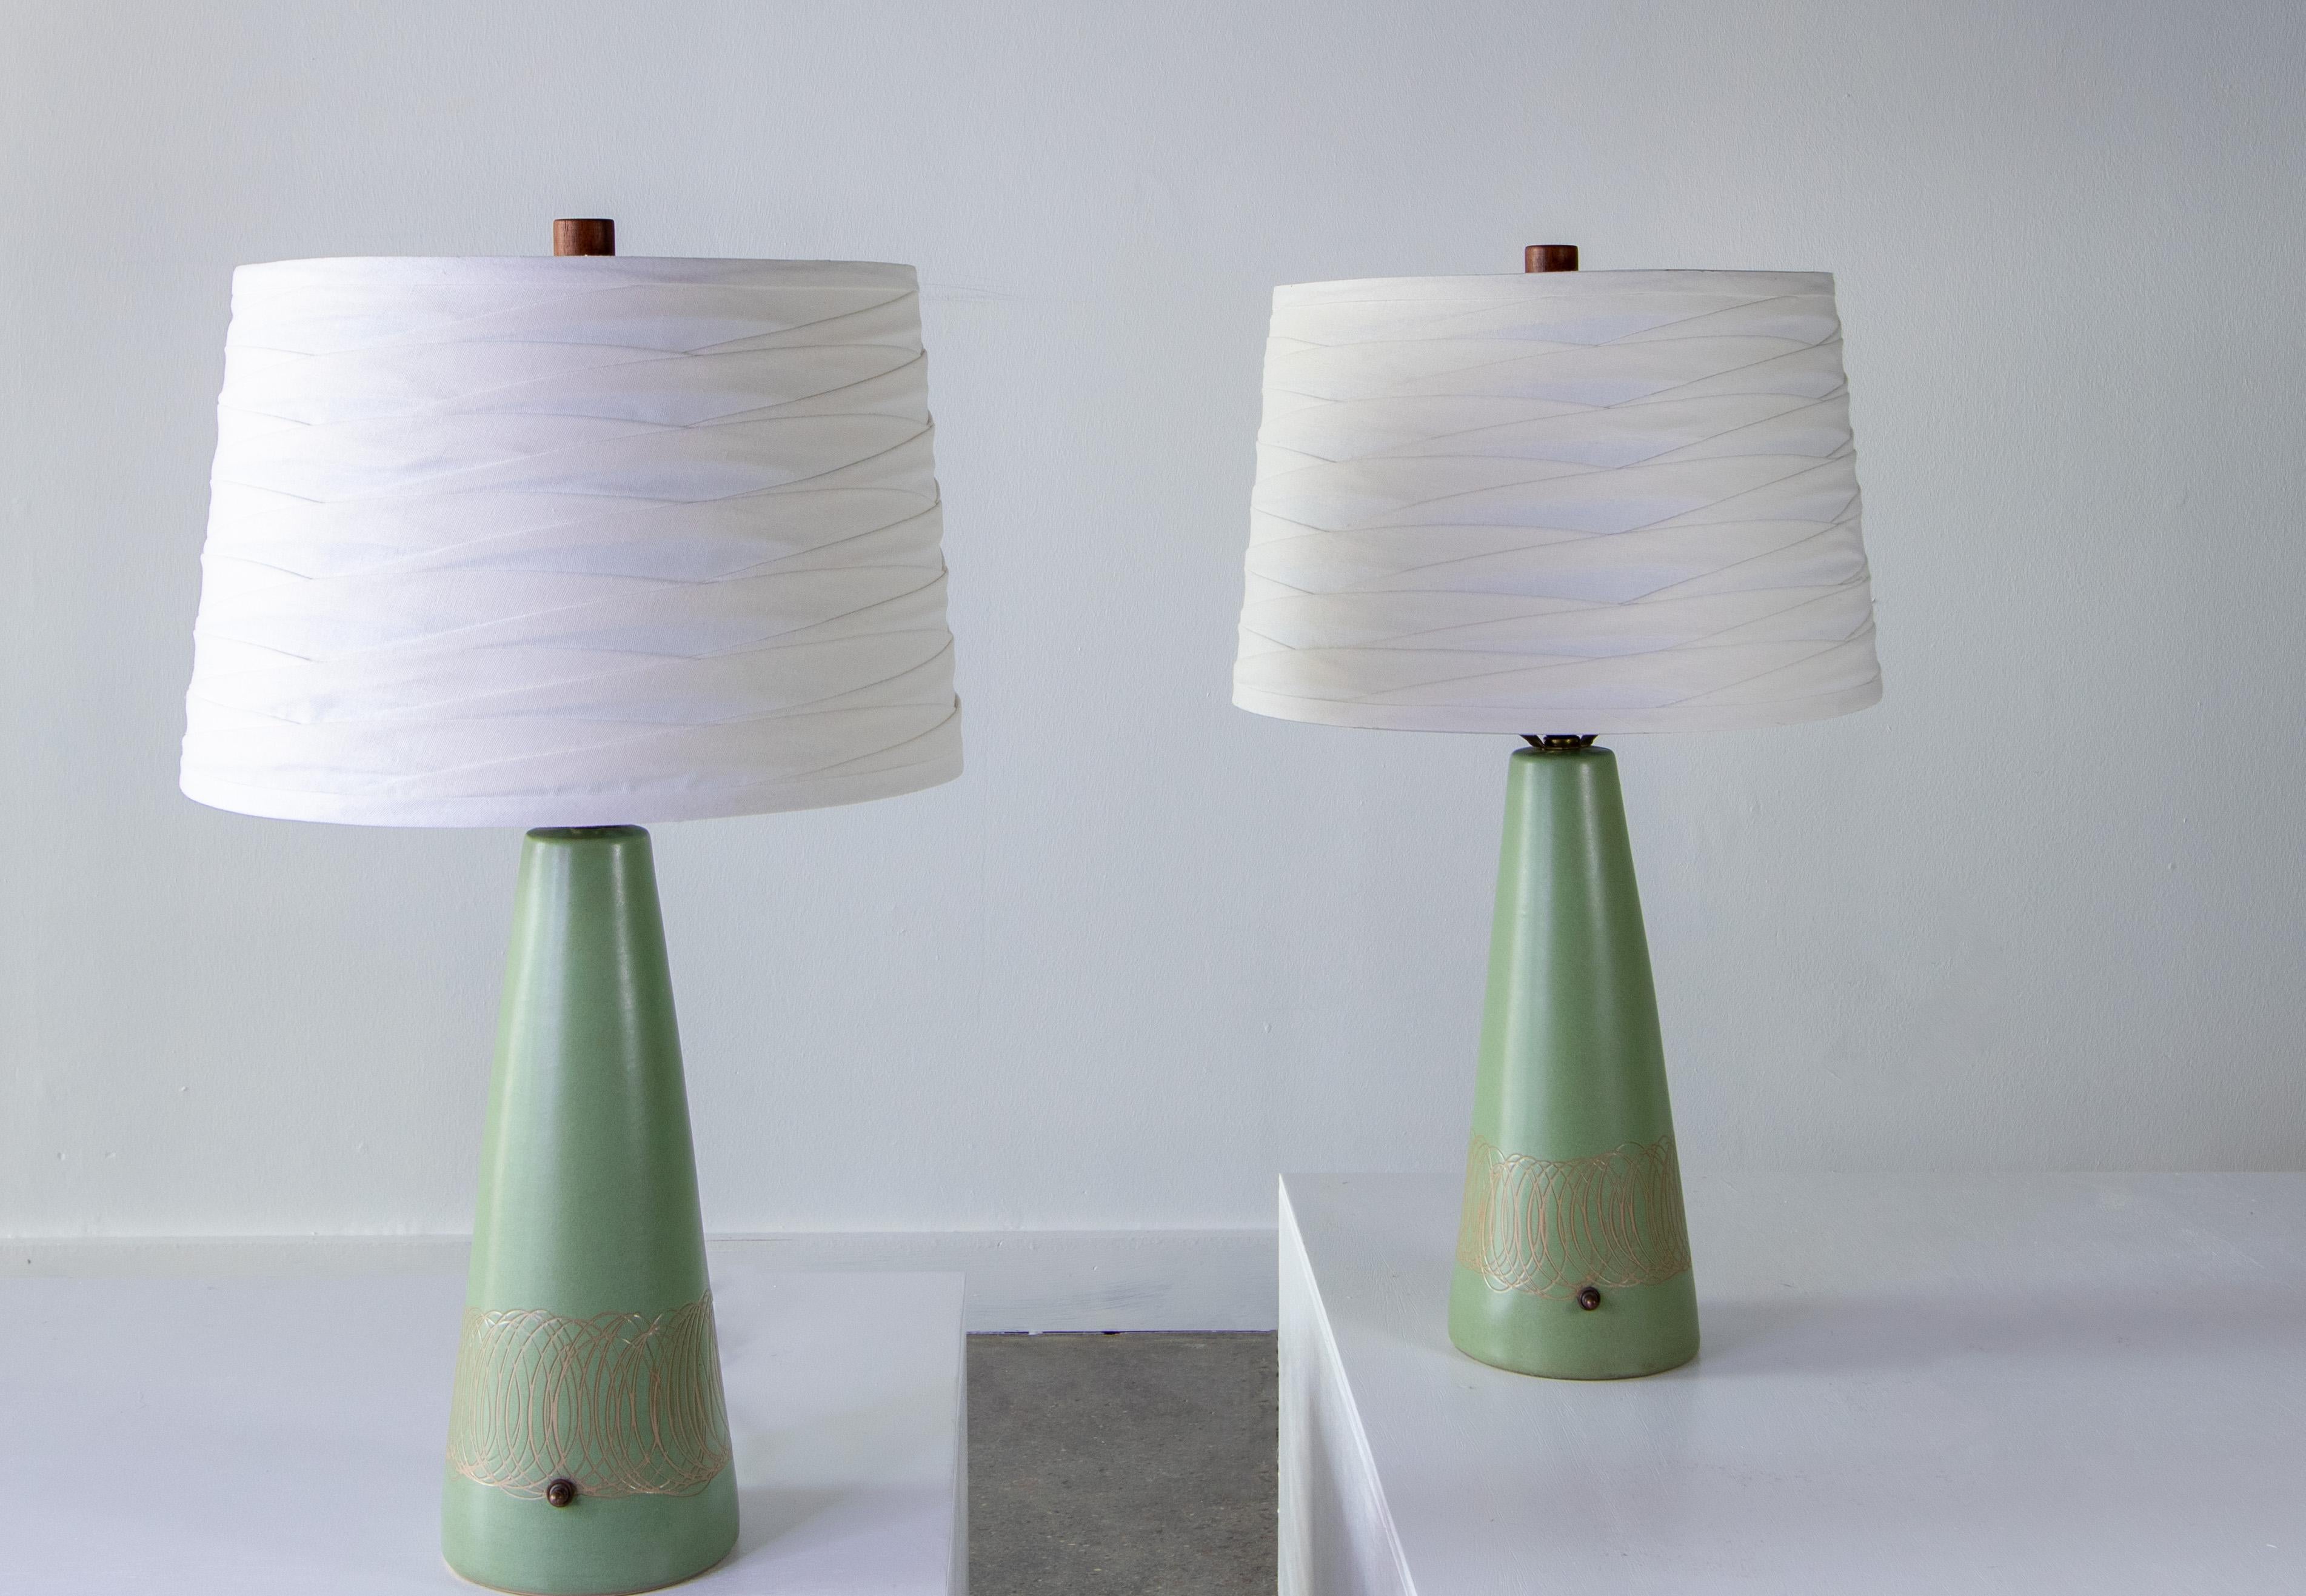 A pair of seafoam green lamps designed by Jane and Gordon Martz of Marshall Studios in Veedersburg Indiana. These lamps are highly sought after and are showing up in designs all over the world. Blending sophistication and modern these lamps are sure